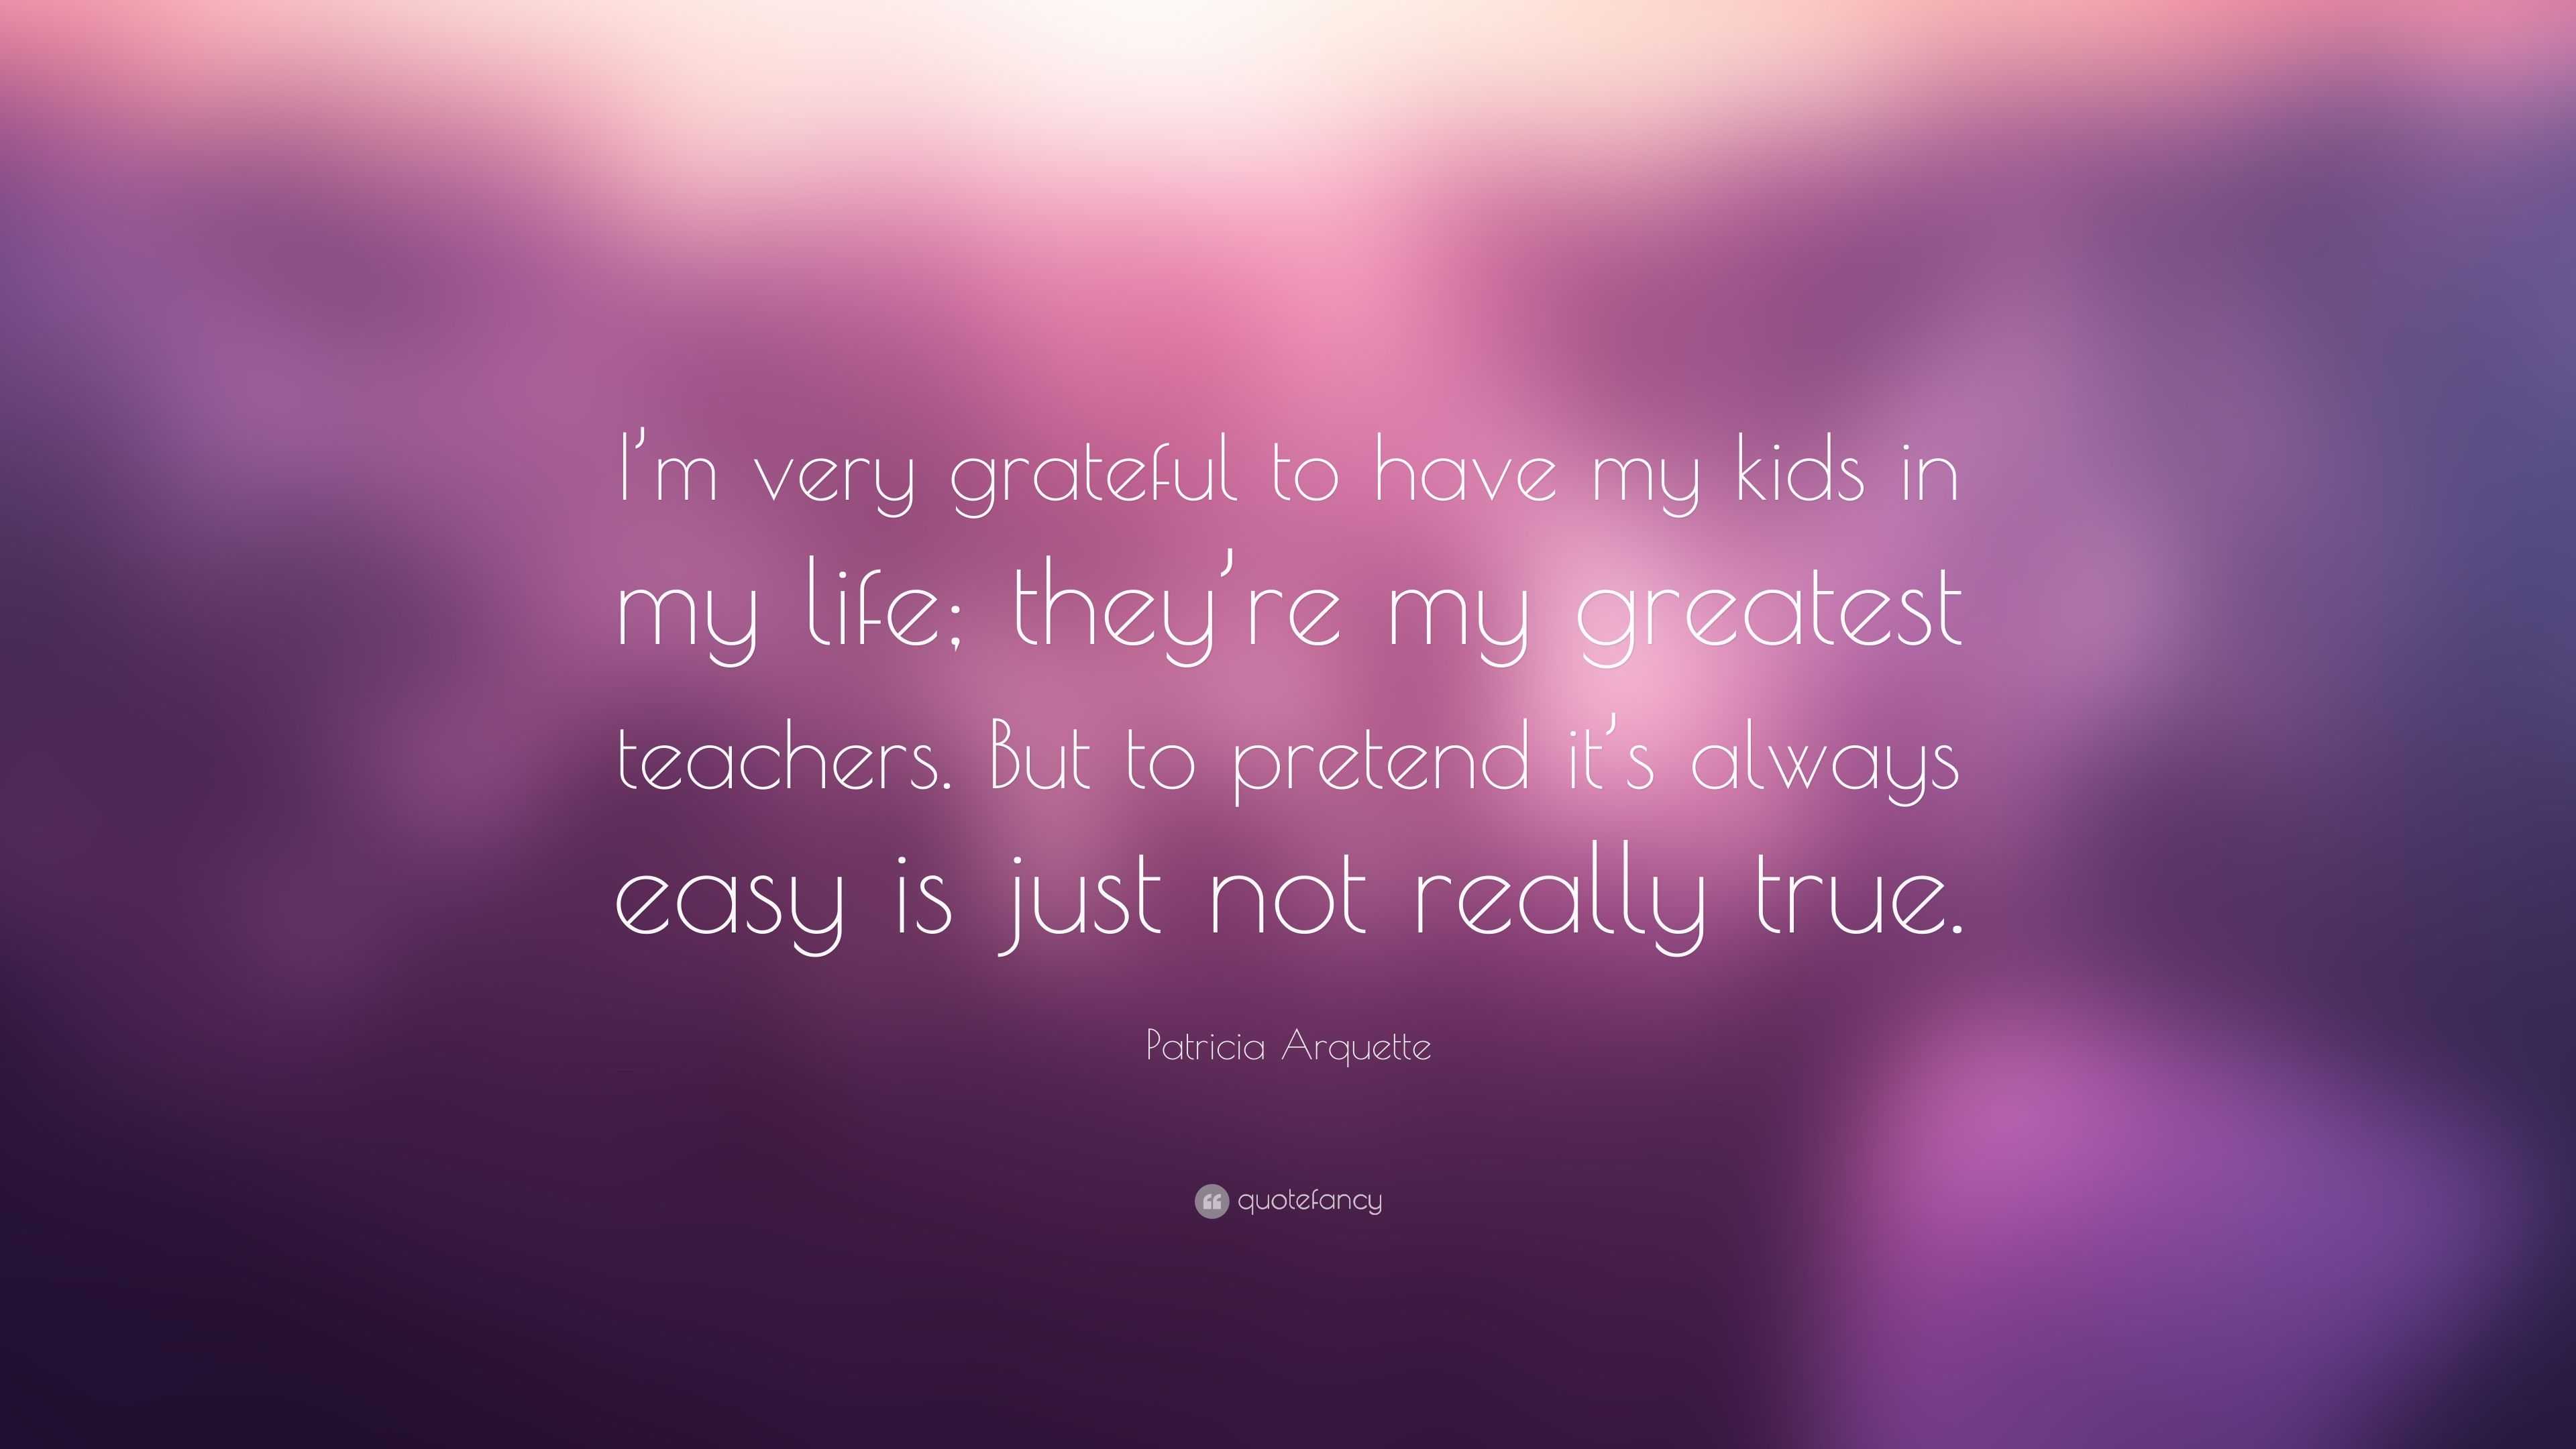 Patricia Arquette Quote: “I’m very grateful to have my kids in my life ...